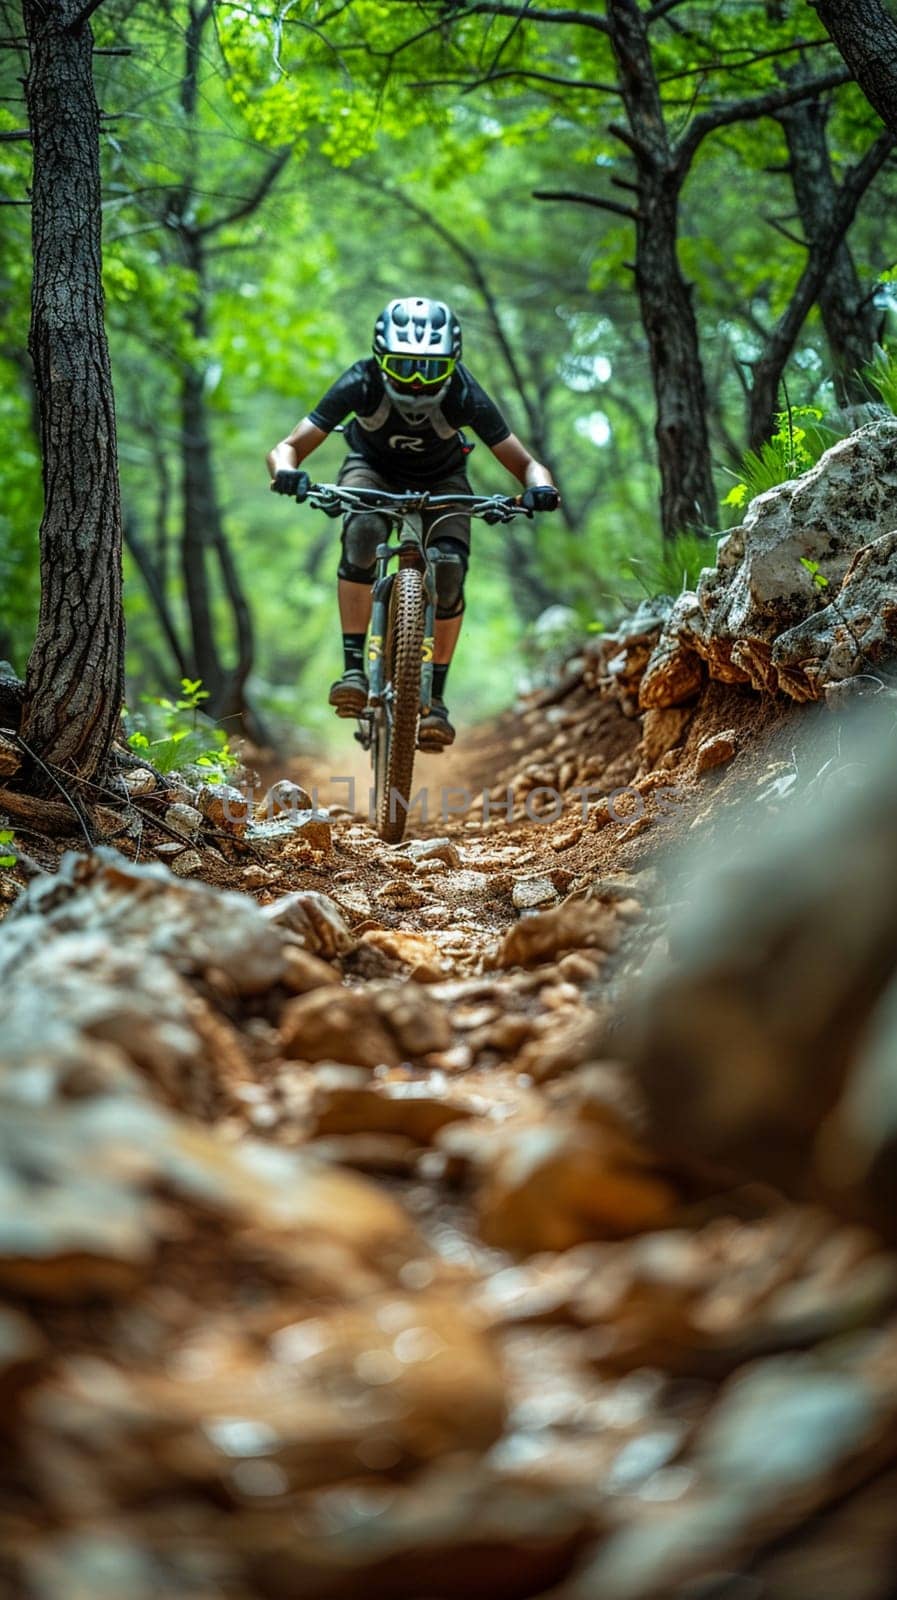 Mountain biker navigating a rugged trail, evoking thrill and nature's challenge.